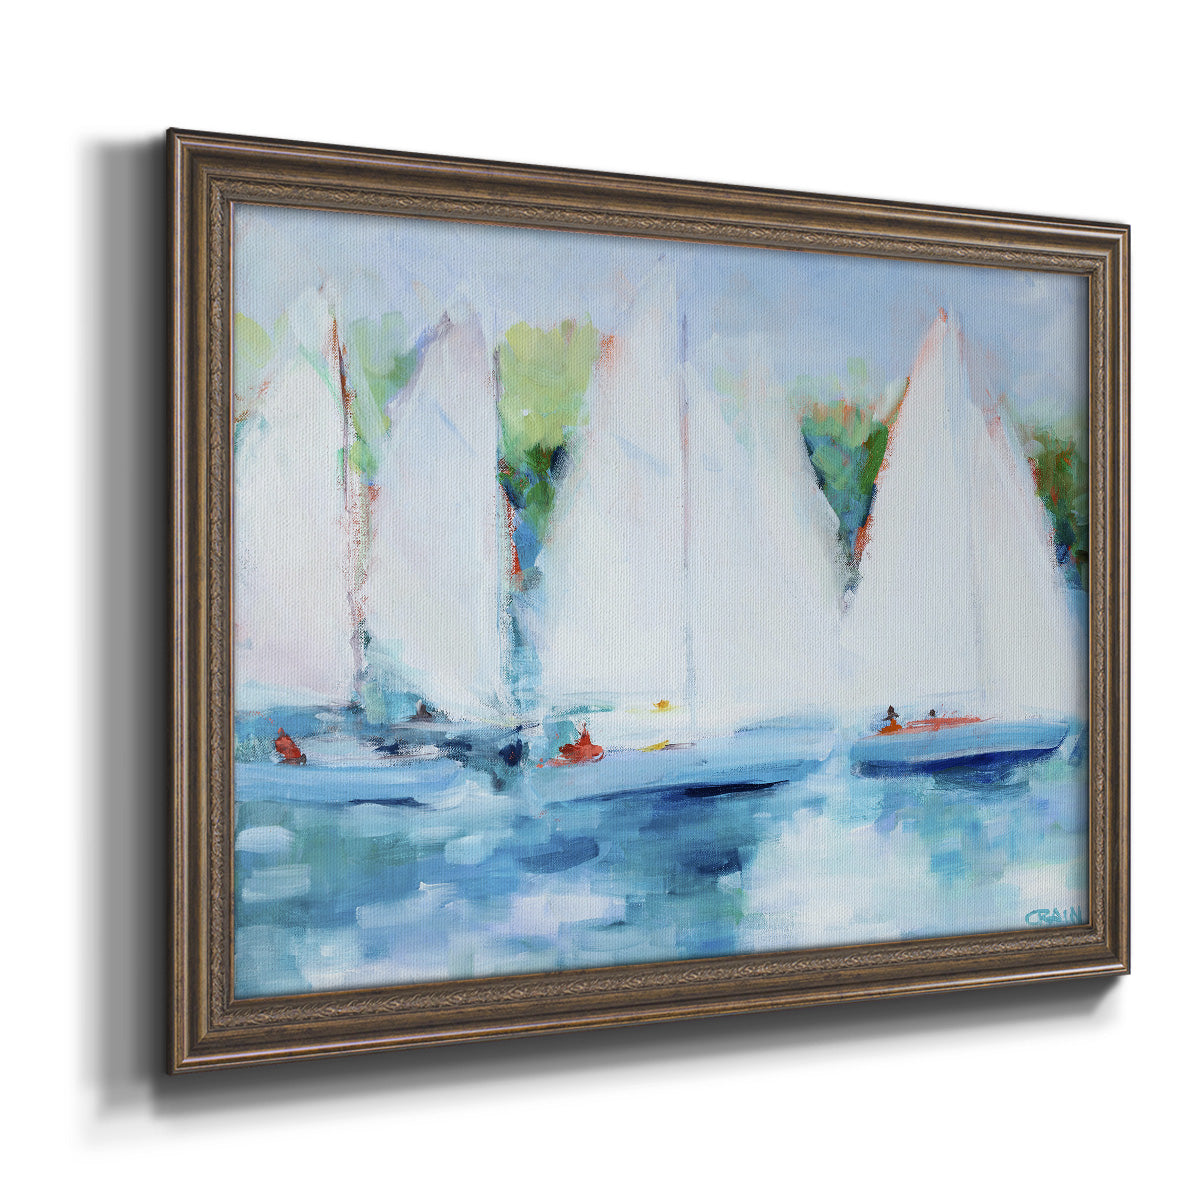 Youth Regatta Premium Framed Canvas- Ready to Hang